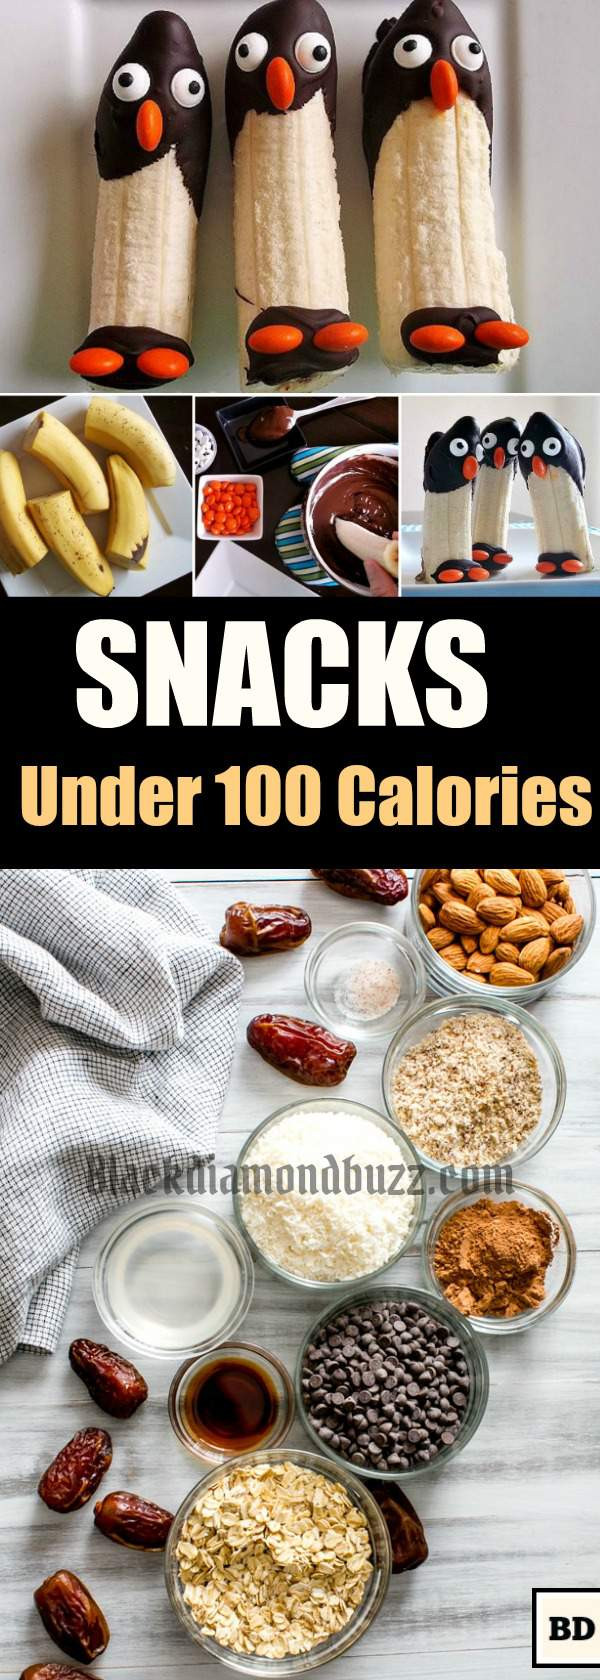 Healthy Low Cal Snacks
 10 Best Easy Healthy Low Calorie Snacks for Weight Loss